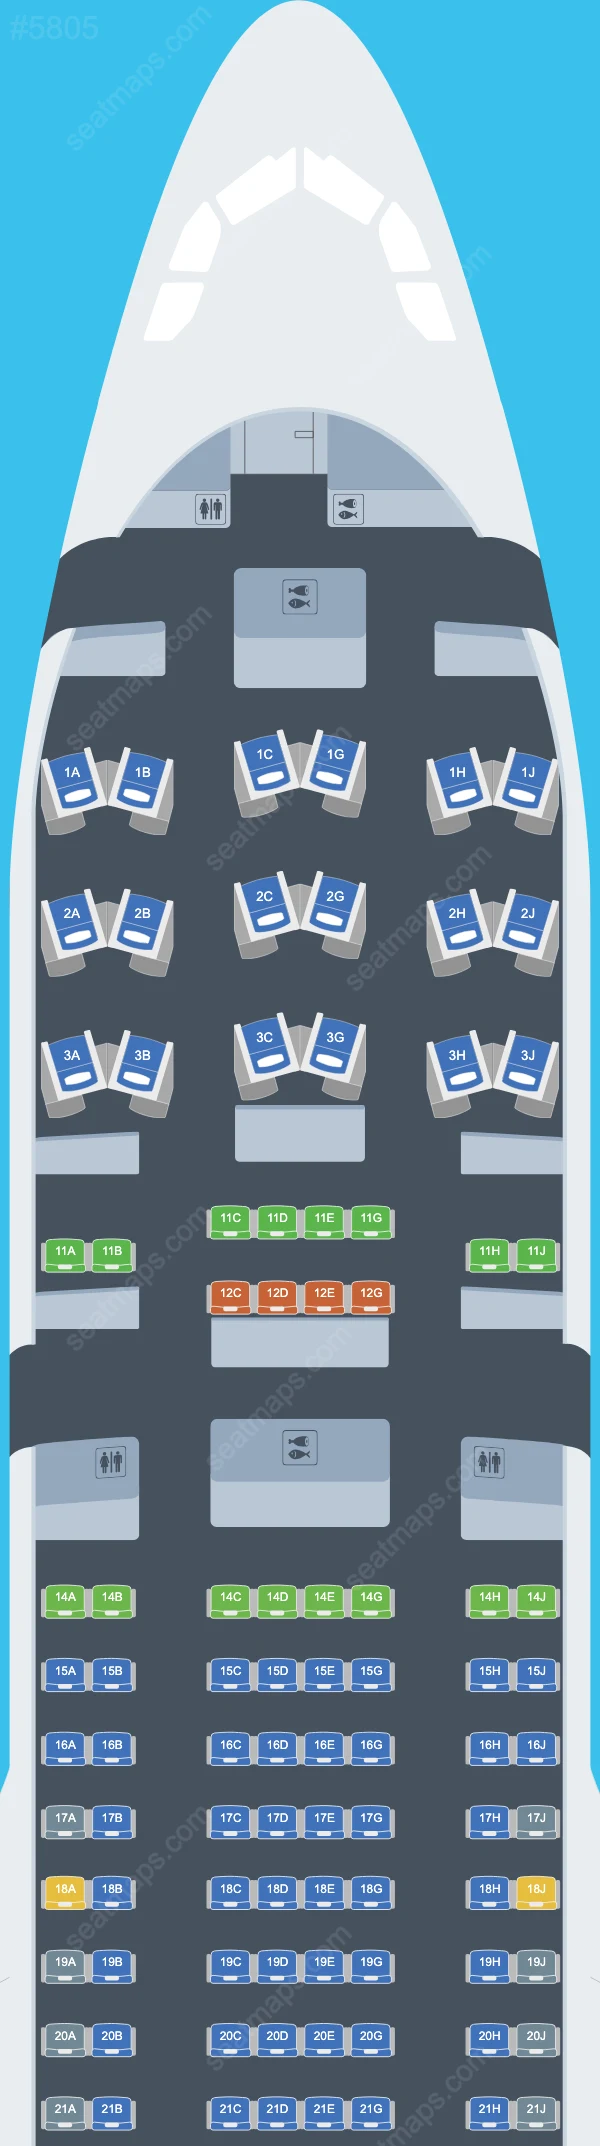 Hawaiian Airlines Airbus A330-200 seatmap mobile preview